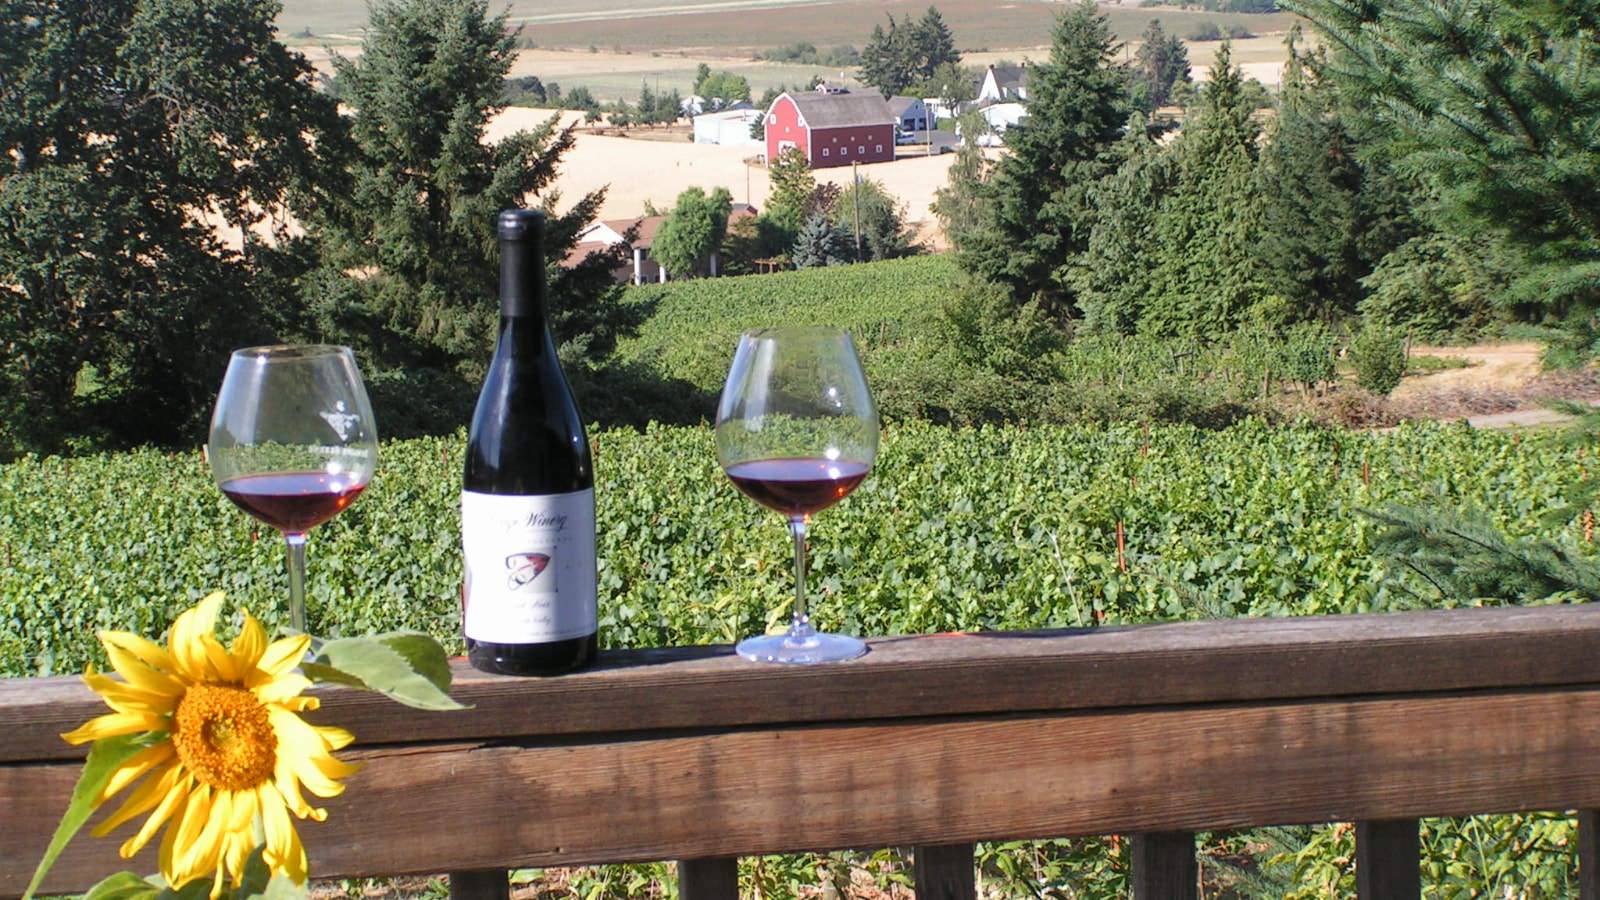 Close up view of a bottle of red wine and two glasses sitting on a wooden ledge with vineyard in the background